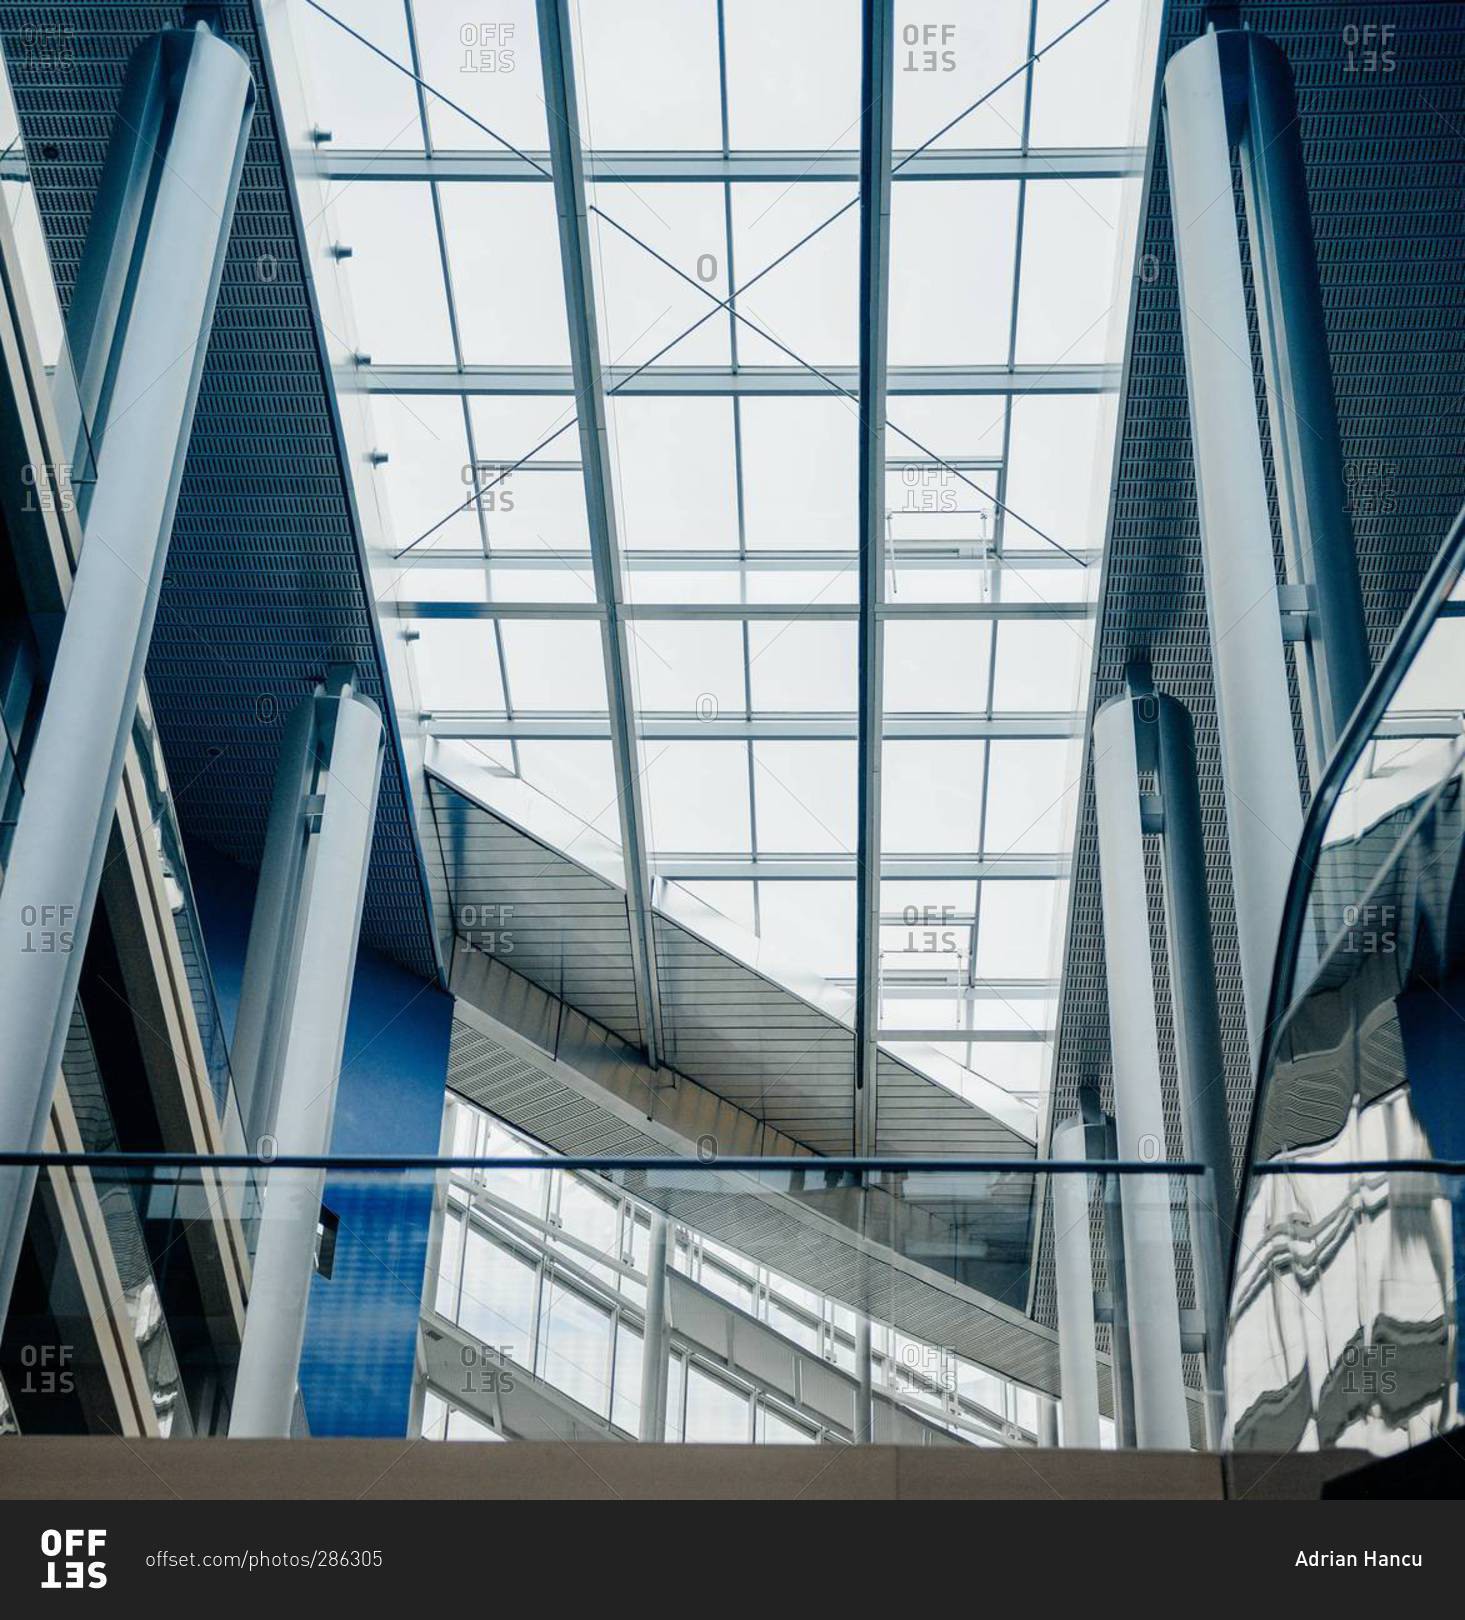 Strasbourg, France - May 02, 2015: Interior of the Seat of the European Parliament with stairs and glass ceiling